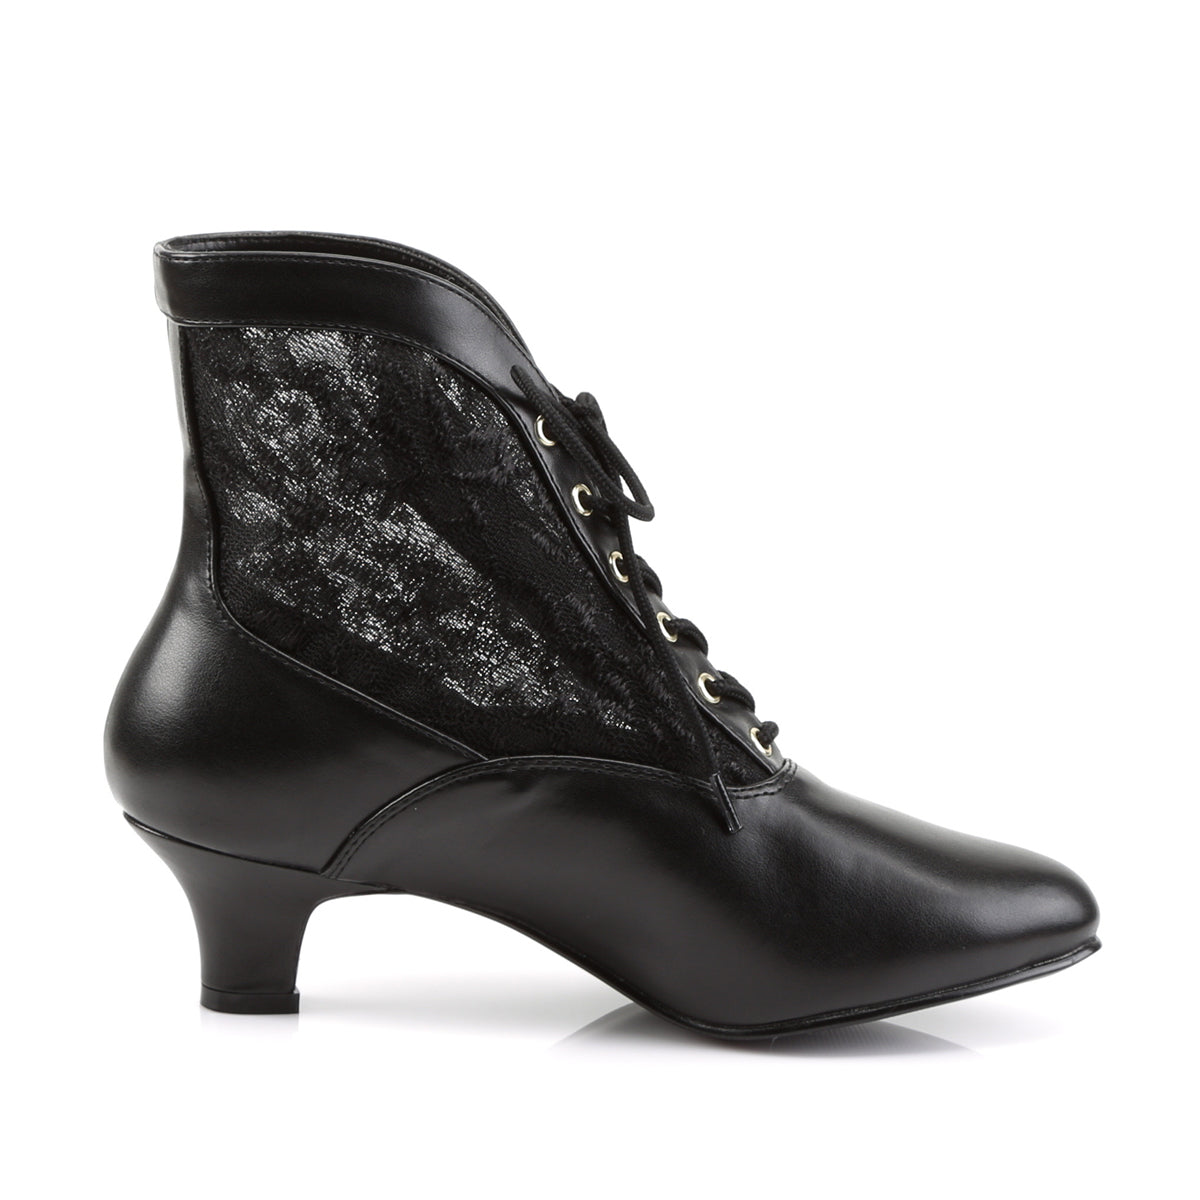 Funtasma Womens Ankle Boots DAME-05 Blk Pu-Lace